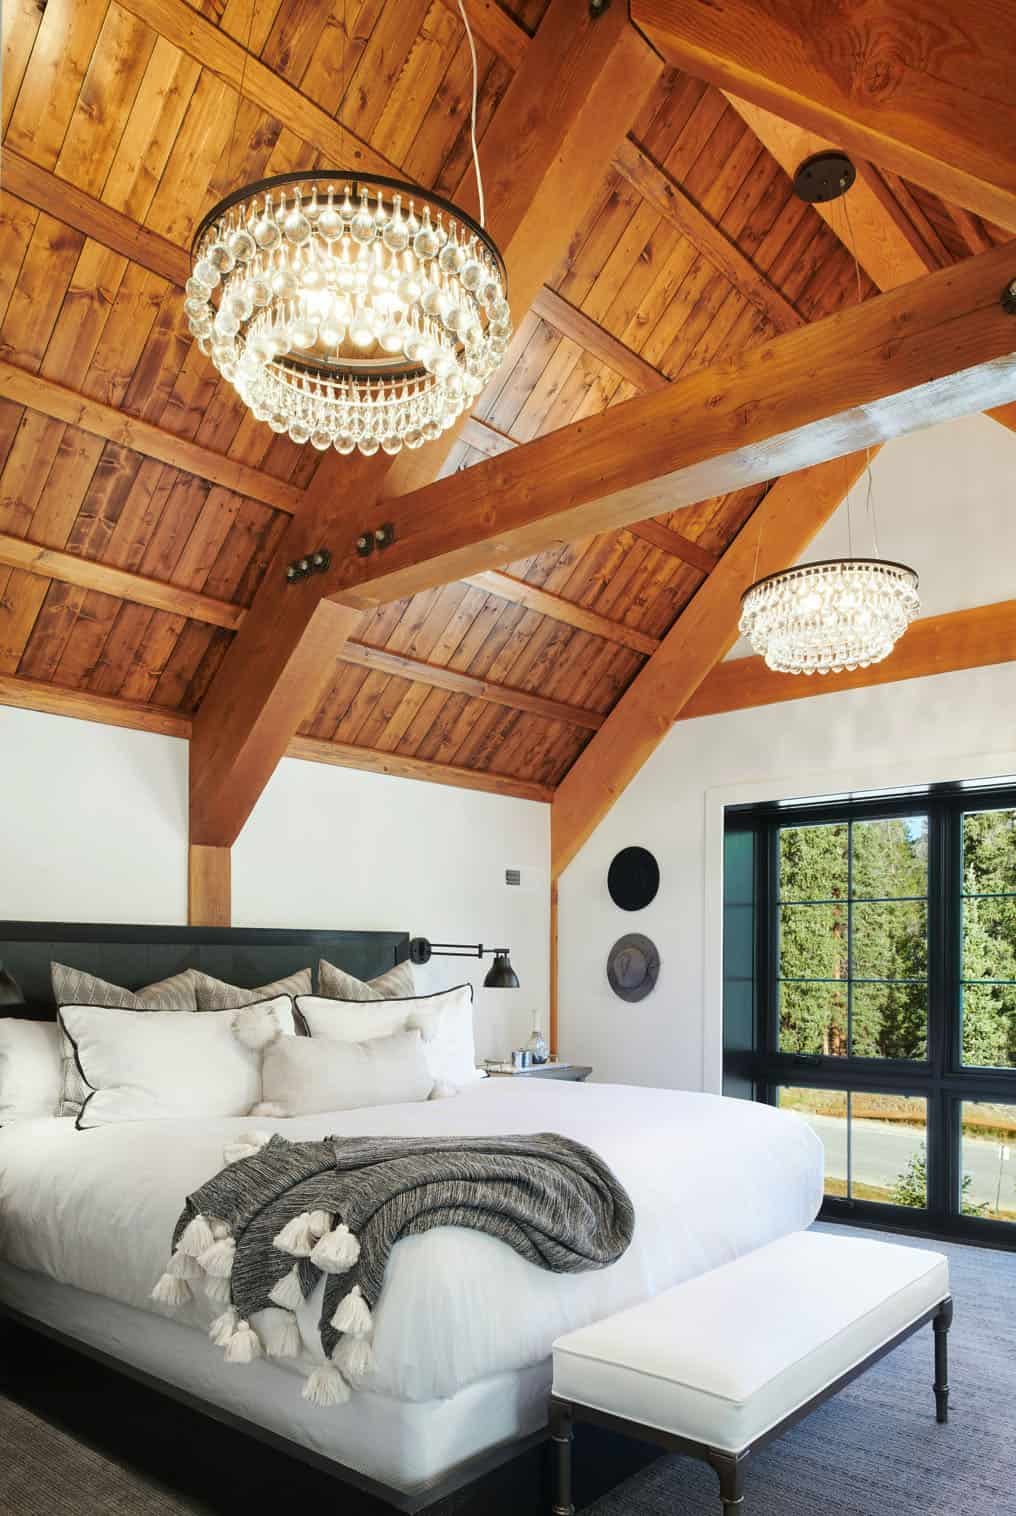 08 The bedroom features a slanted ceiling accent with crystal chandeliers and cool views